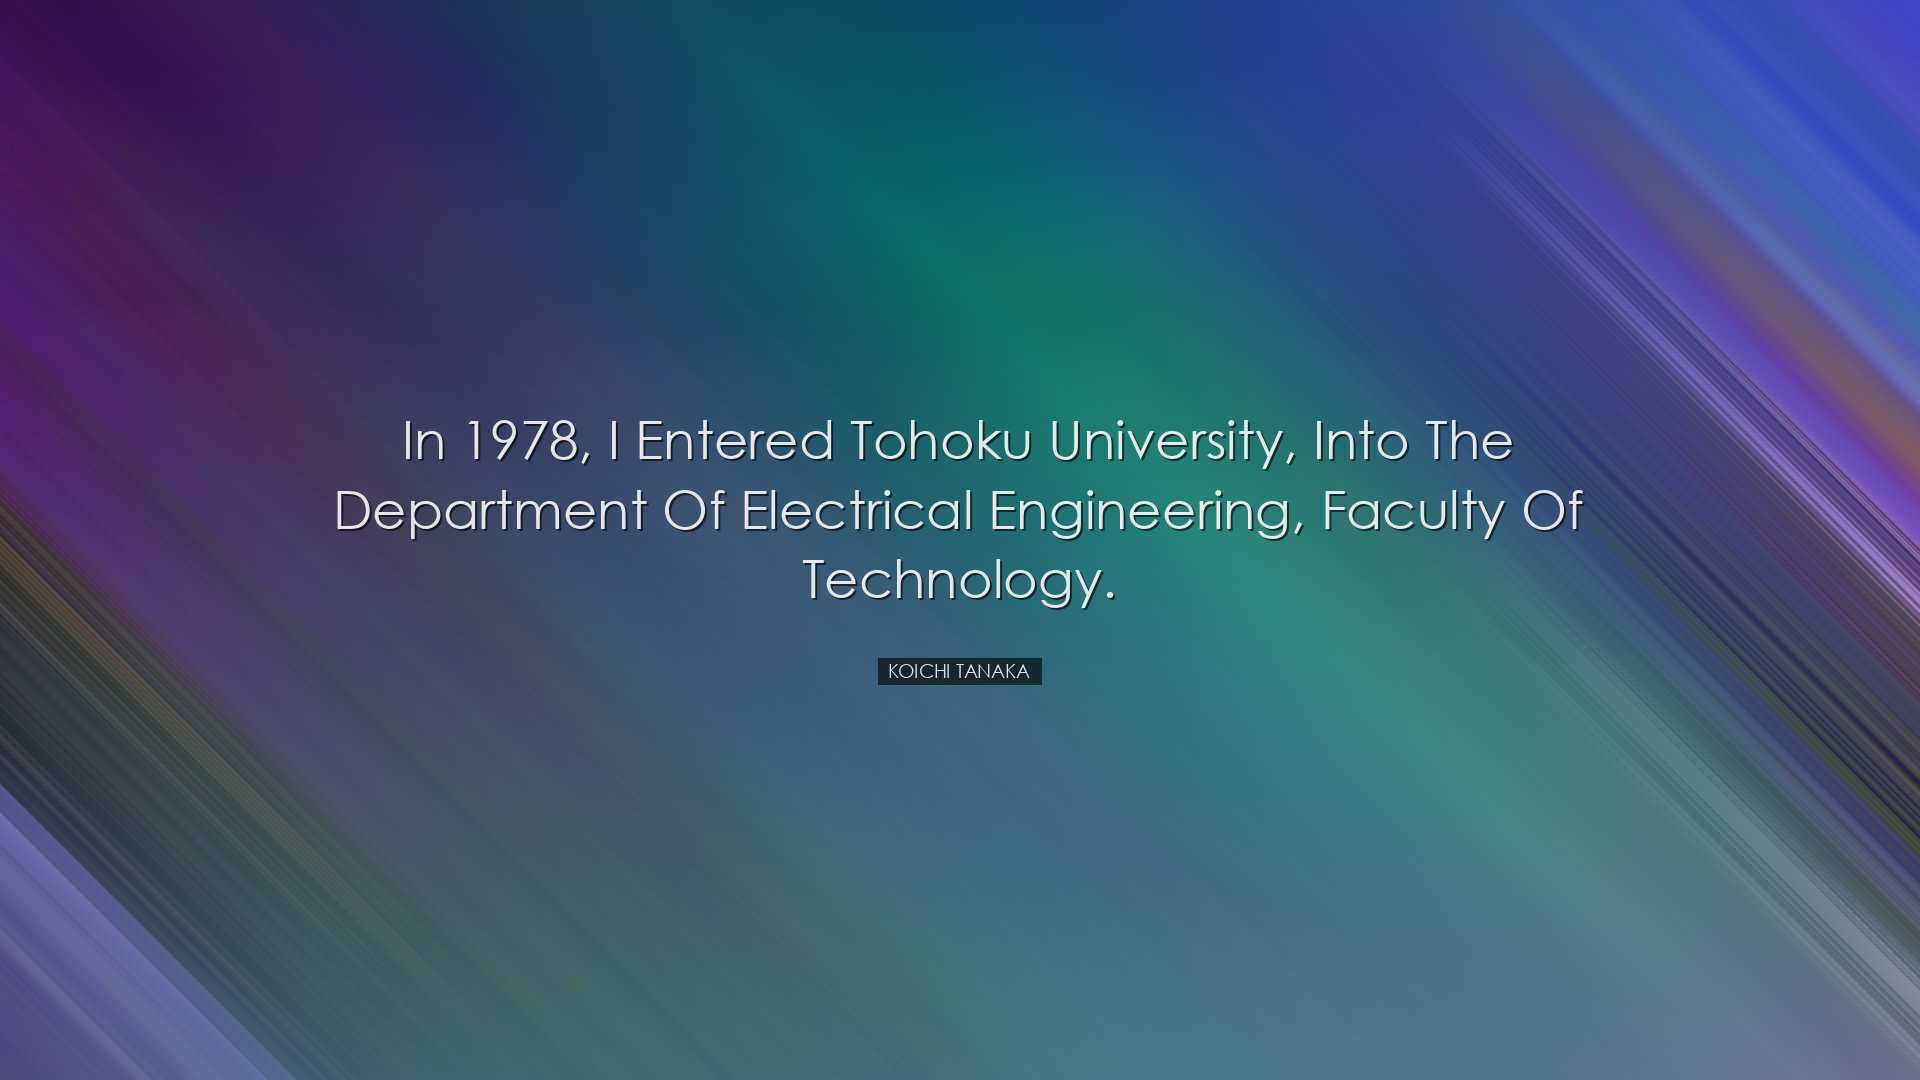 In 1978, I entered Tohoku University, into the Department of Elect